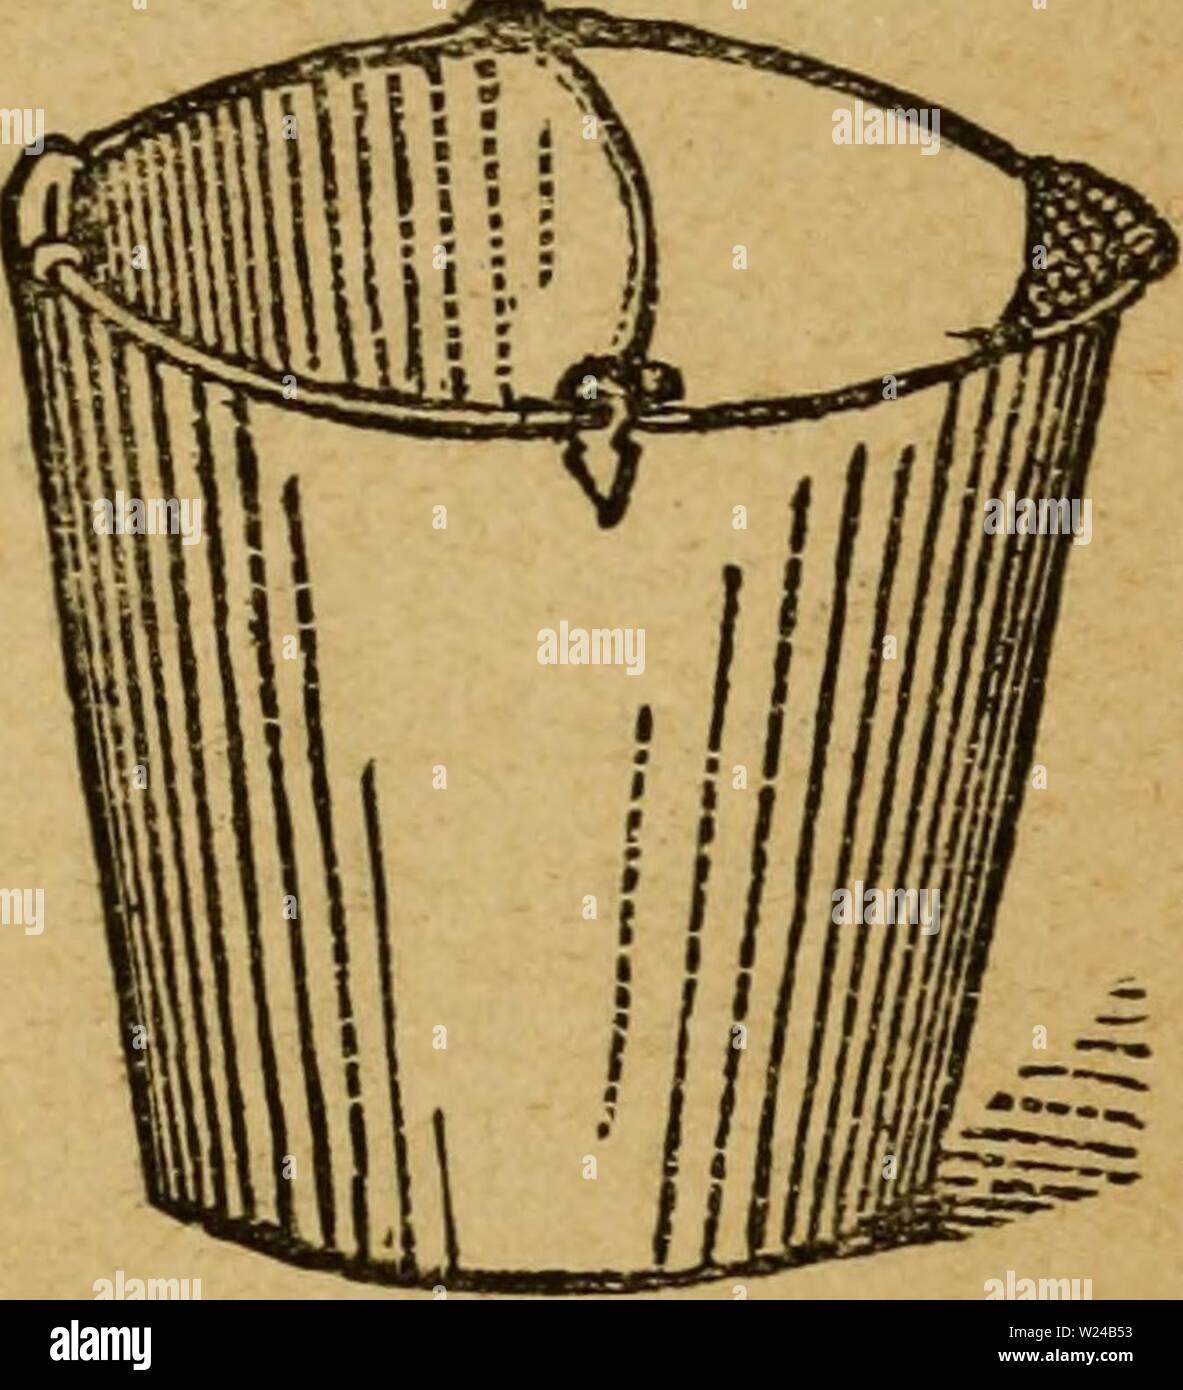 Archive image from page 224 of The dairyman's manual; a practical. The dairyman's manual; a practical treatise on the dairy  dairymansmanualp00stew Year: 1888  Fig. 26—A DAIRY PAIL. Fig. 27.—MILKING PAIL. of milking is as follows. The cows should be kept in a contented and quiet condition during the milking. Pre- viously, they should have been thoroughly cleaned by carding and brushing, and the stable floor should be made clean for the milkers. The milkers should be clean and their clothes free from dust. A quick brush with a broom-corn whisk will quickly remove any adhering matter from th.e c Stock Photo